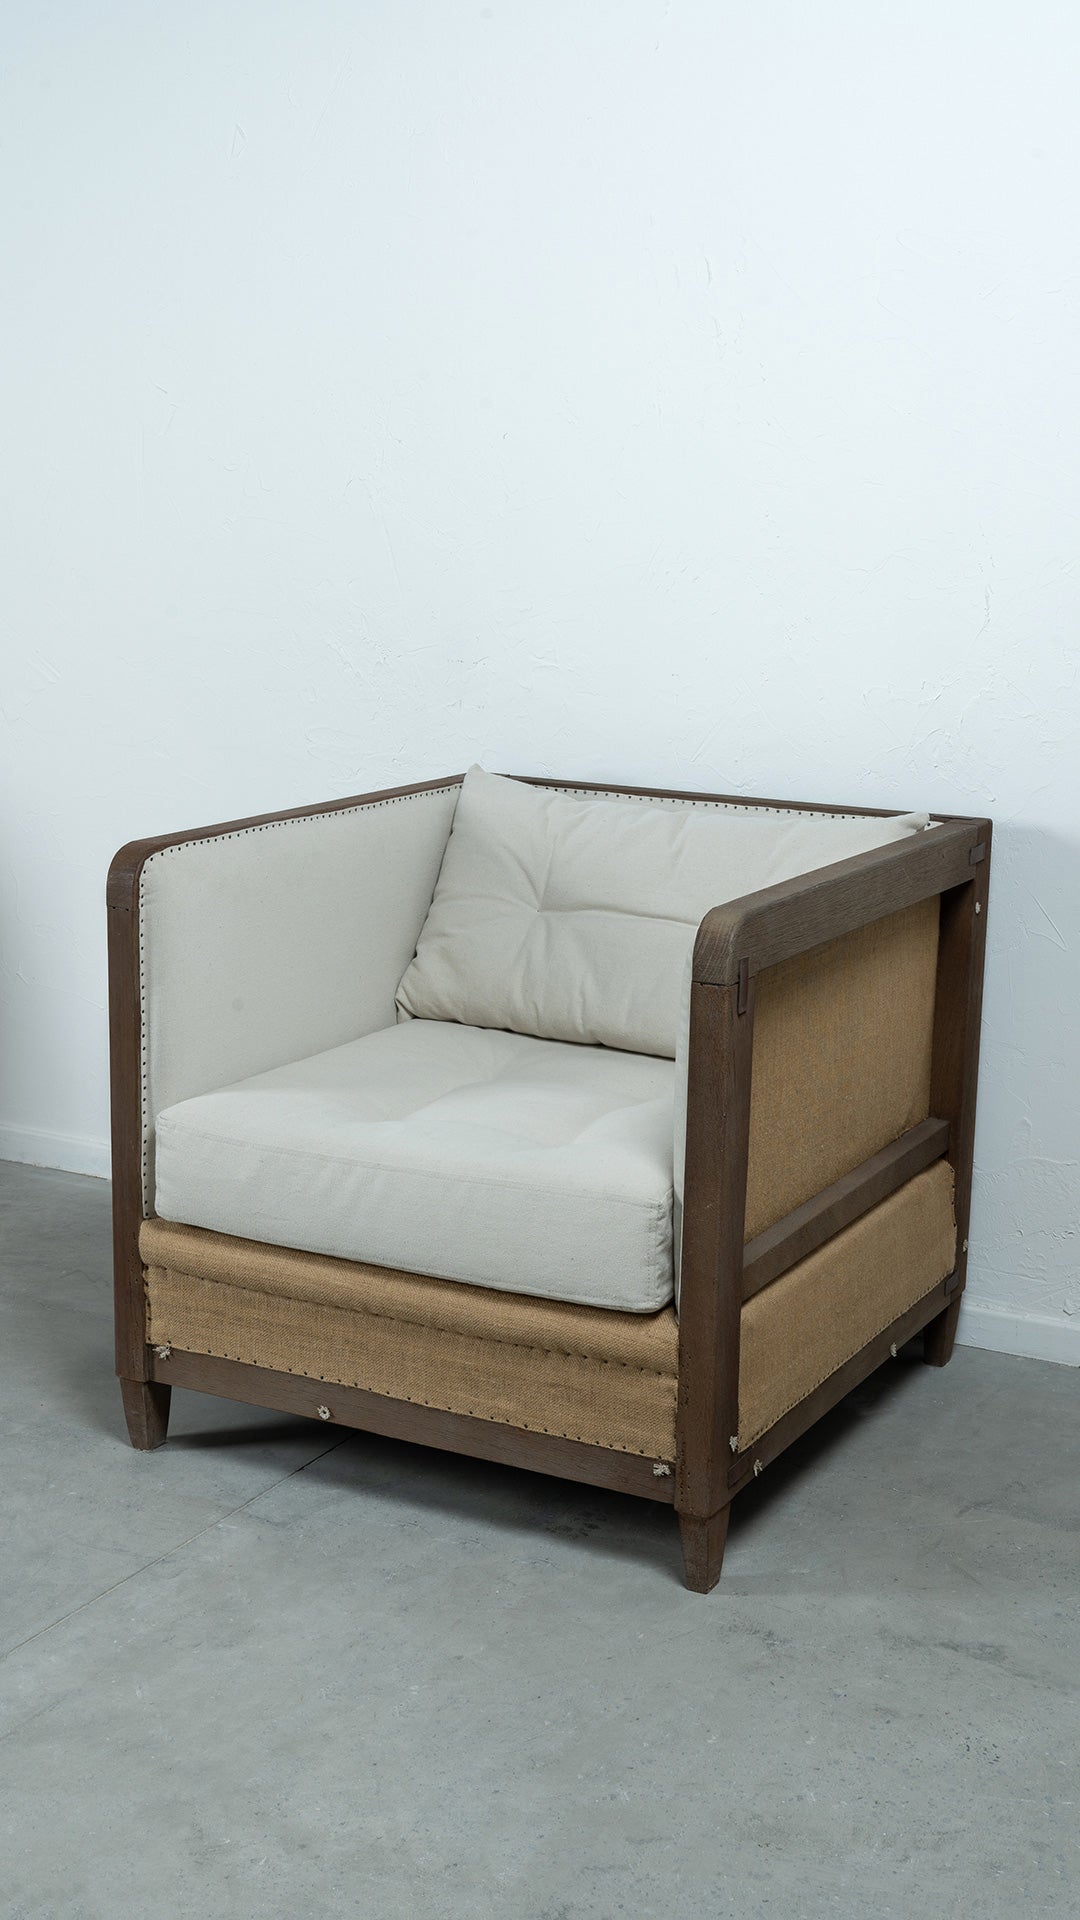 Deconstructed Arm Chair  - WS Living - UAE -  Wood and steel Furnitures - Dubai